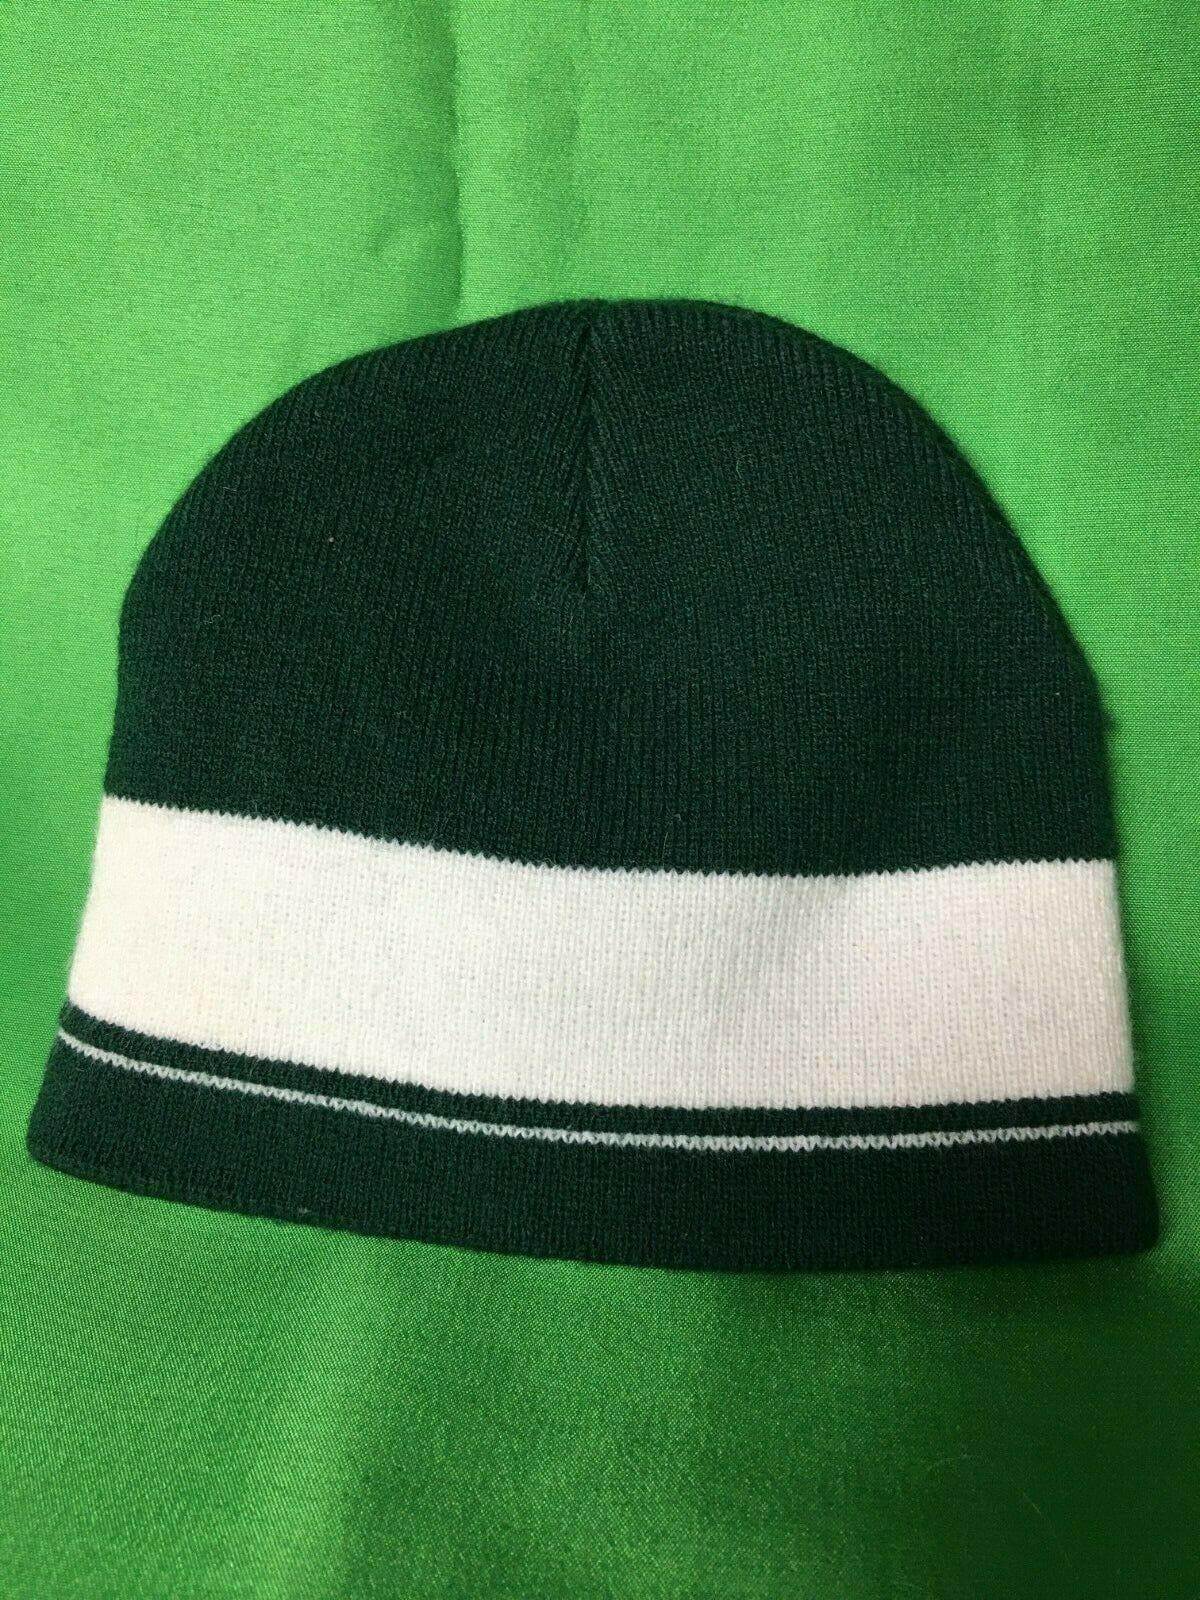 NFL Green Bay Packers Beanie Youth X-Small/Small 4-8